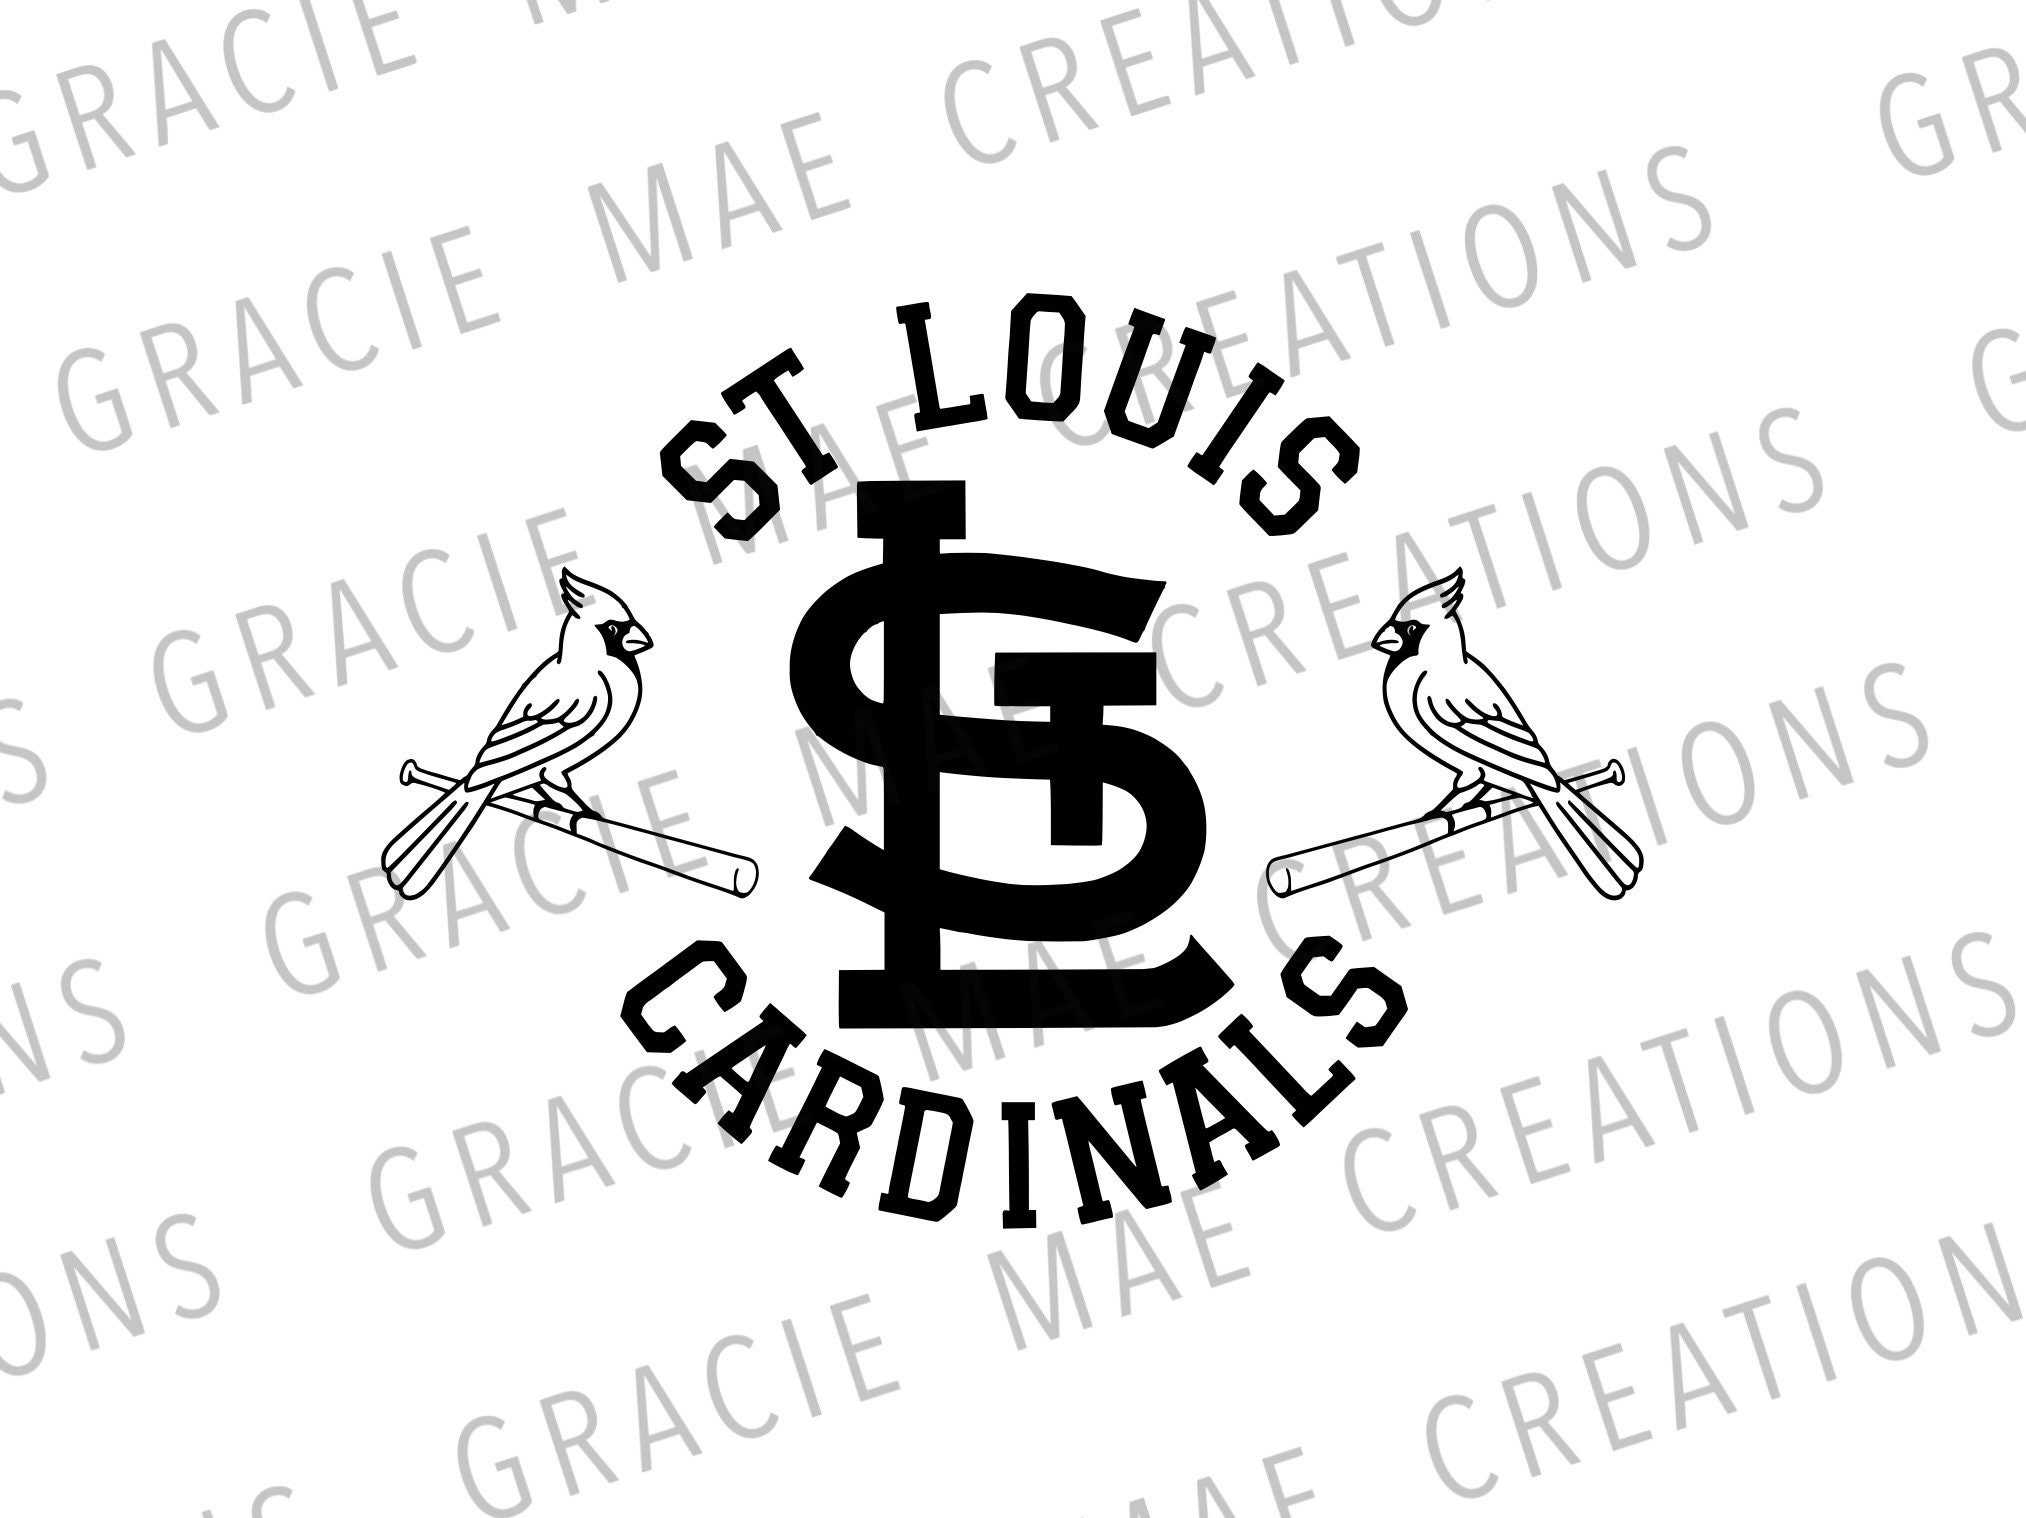 Vintage 1960's style St. Louis Cardinals Baseball retro travel decal sticker